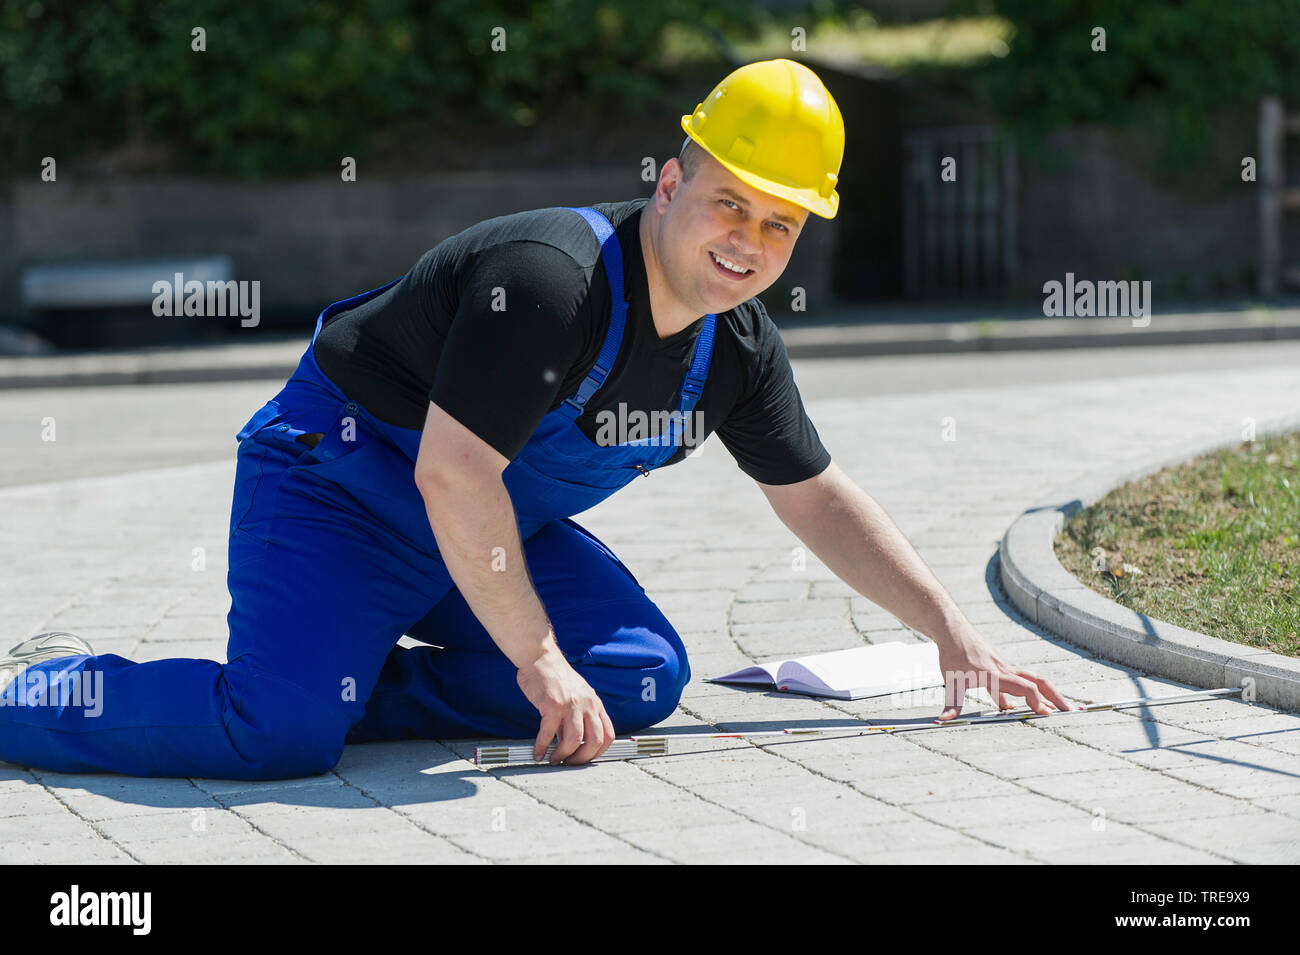 Construction worker measuring a road with a folding yardstick Stock Photo